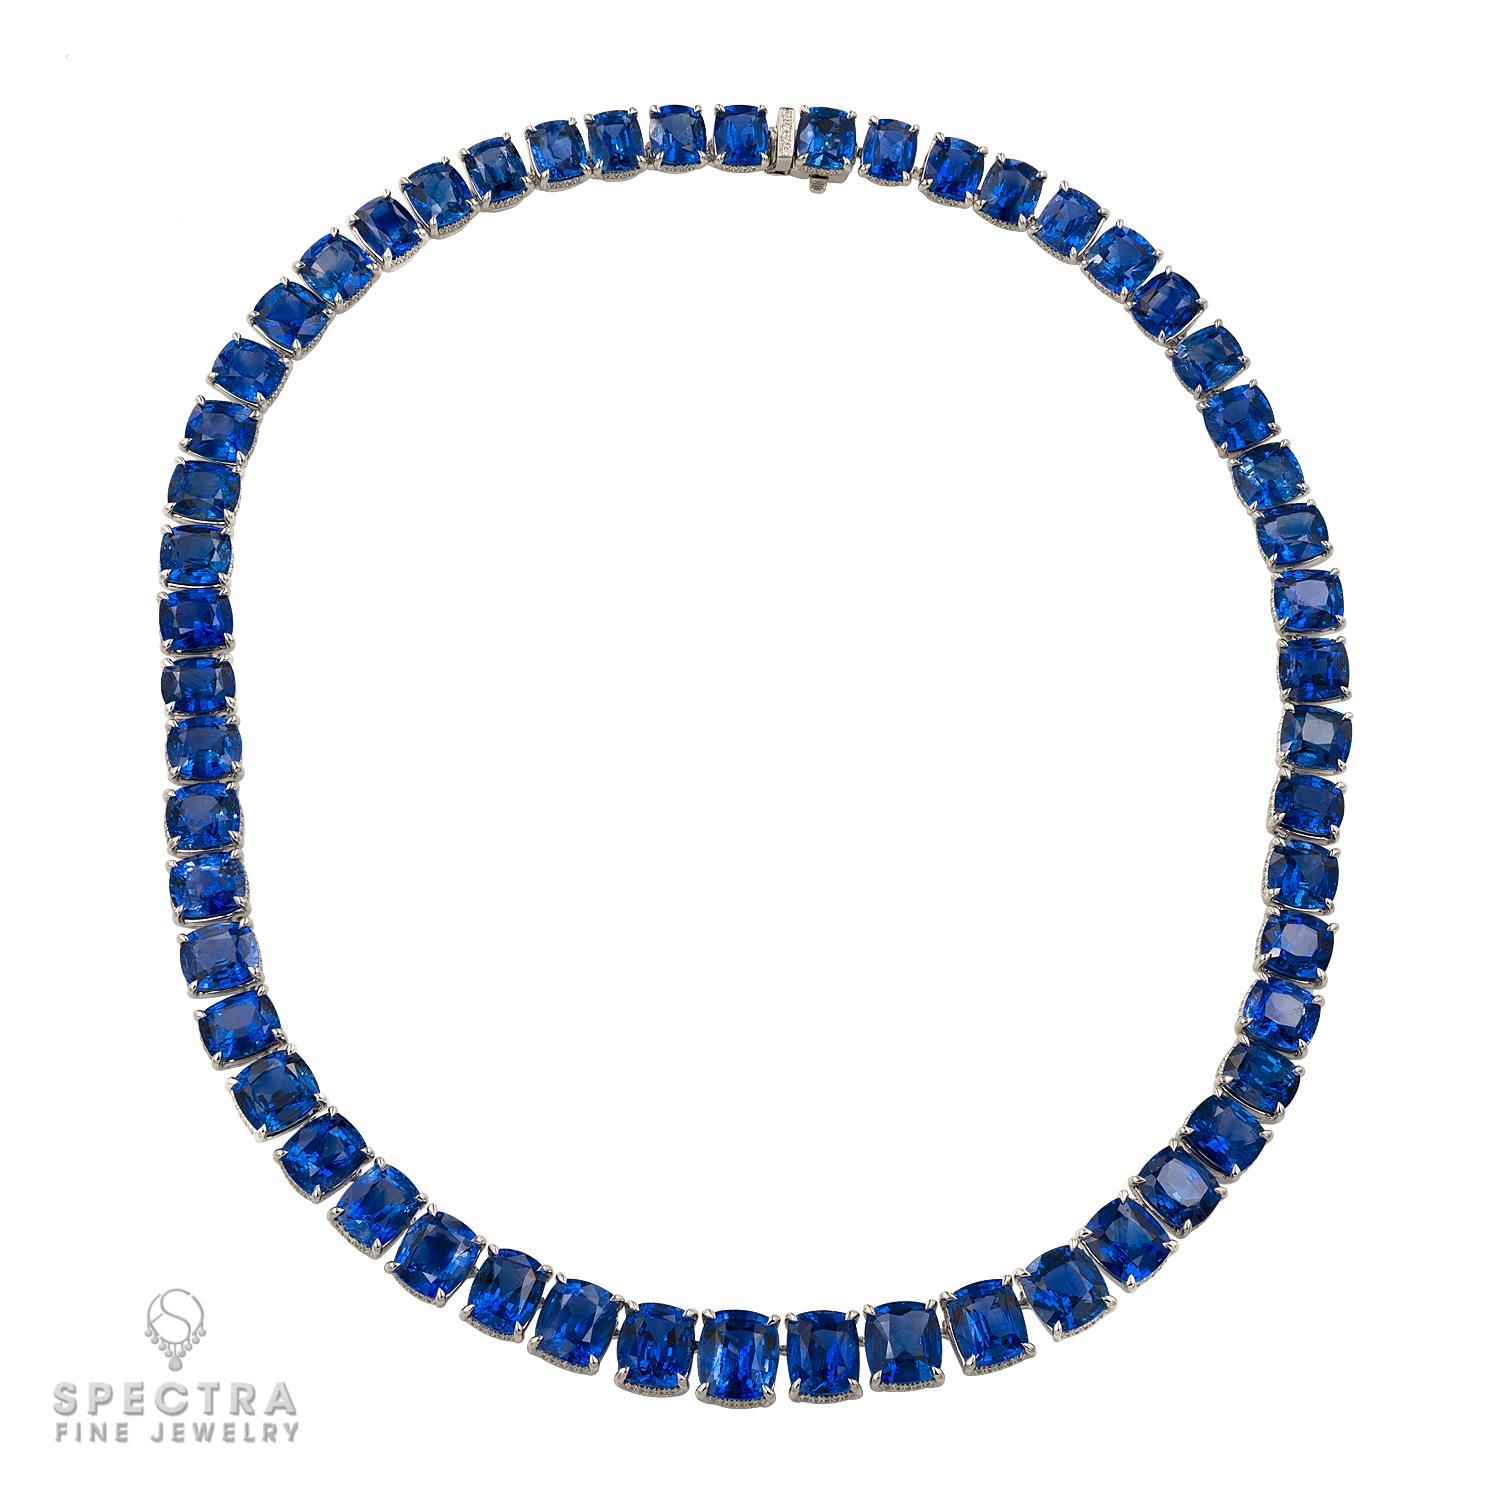 Presenting a sophisticated statement piece: the Ceylon Sapphire Diamond Tennis Necklace crafted from exquisite natural sapphires and diamonds, set in lustrous 18k white gold.
Featuring 58 cushion sapphires totaling an impressive 130.26 carats, each